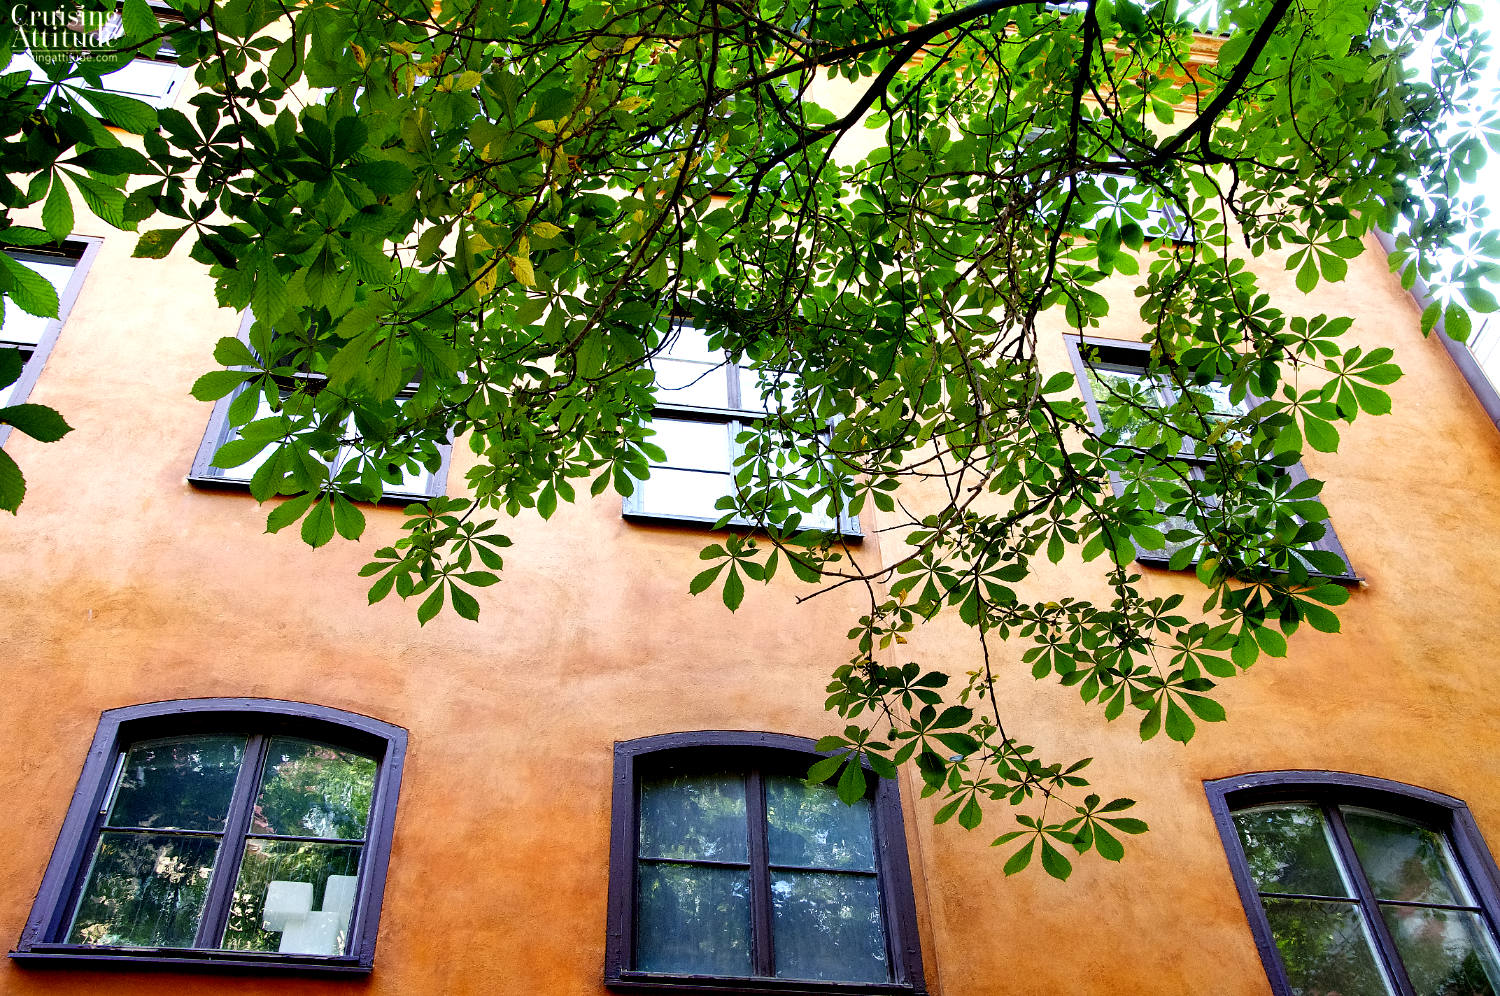 Under the Chestnut Tree in the Old Town of Stockholm - Cruising Attitude Sailing Blog | Discovery 55